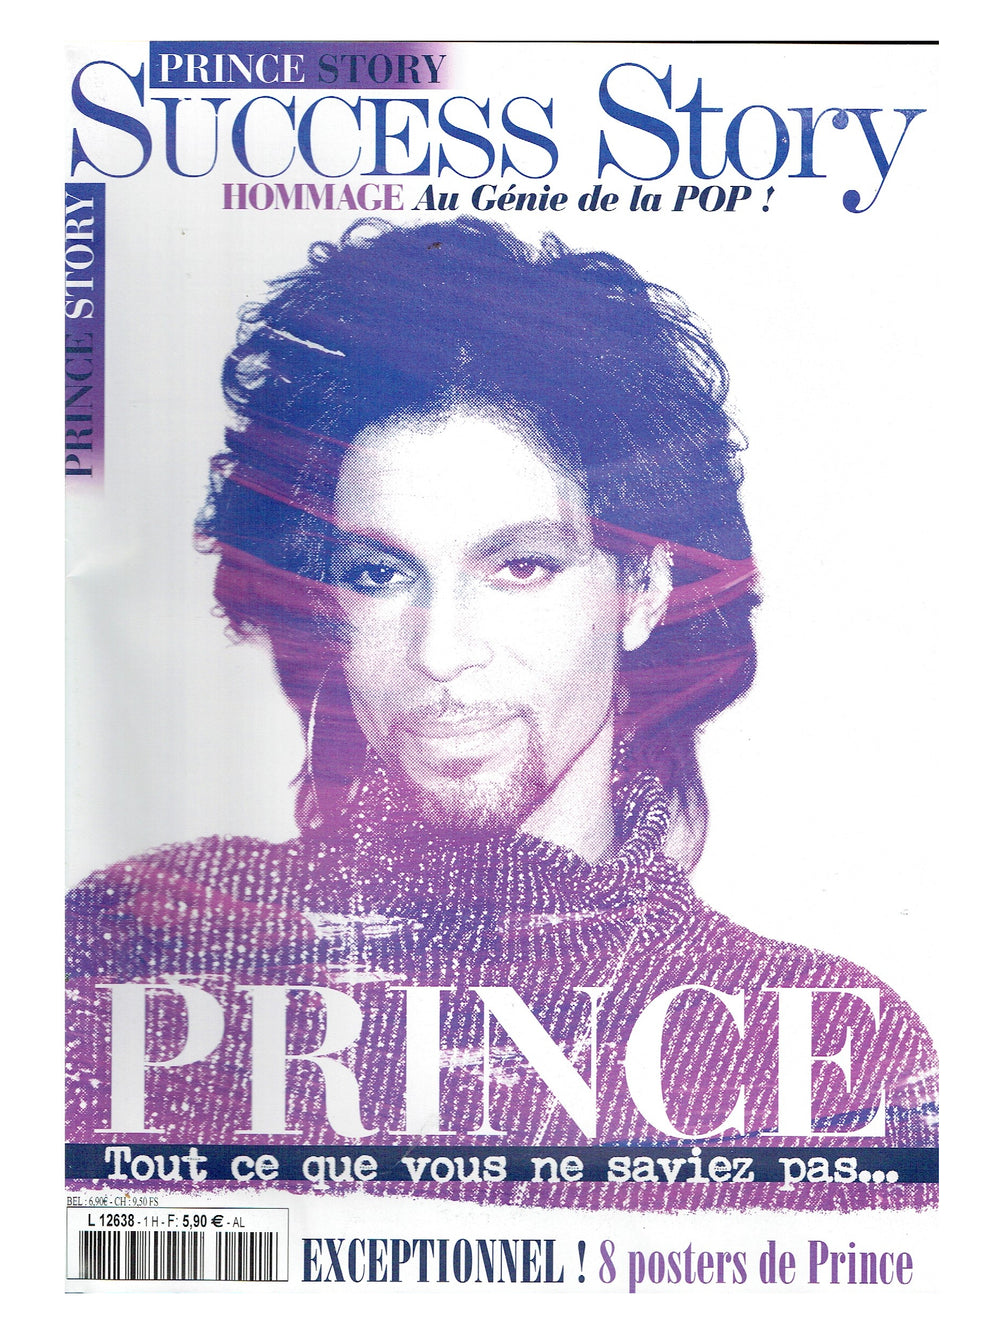 Prince Story Homage Magazine French Language All Prince INC 4 Double Sided Posters